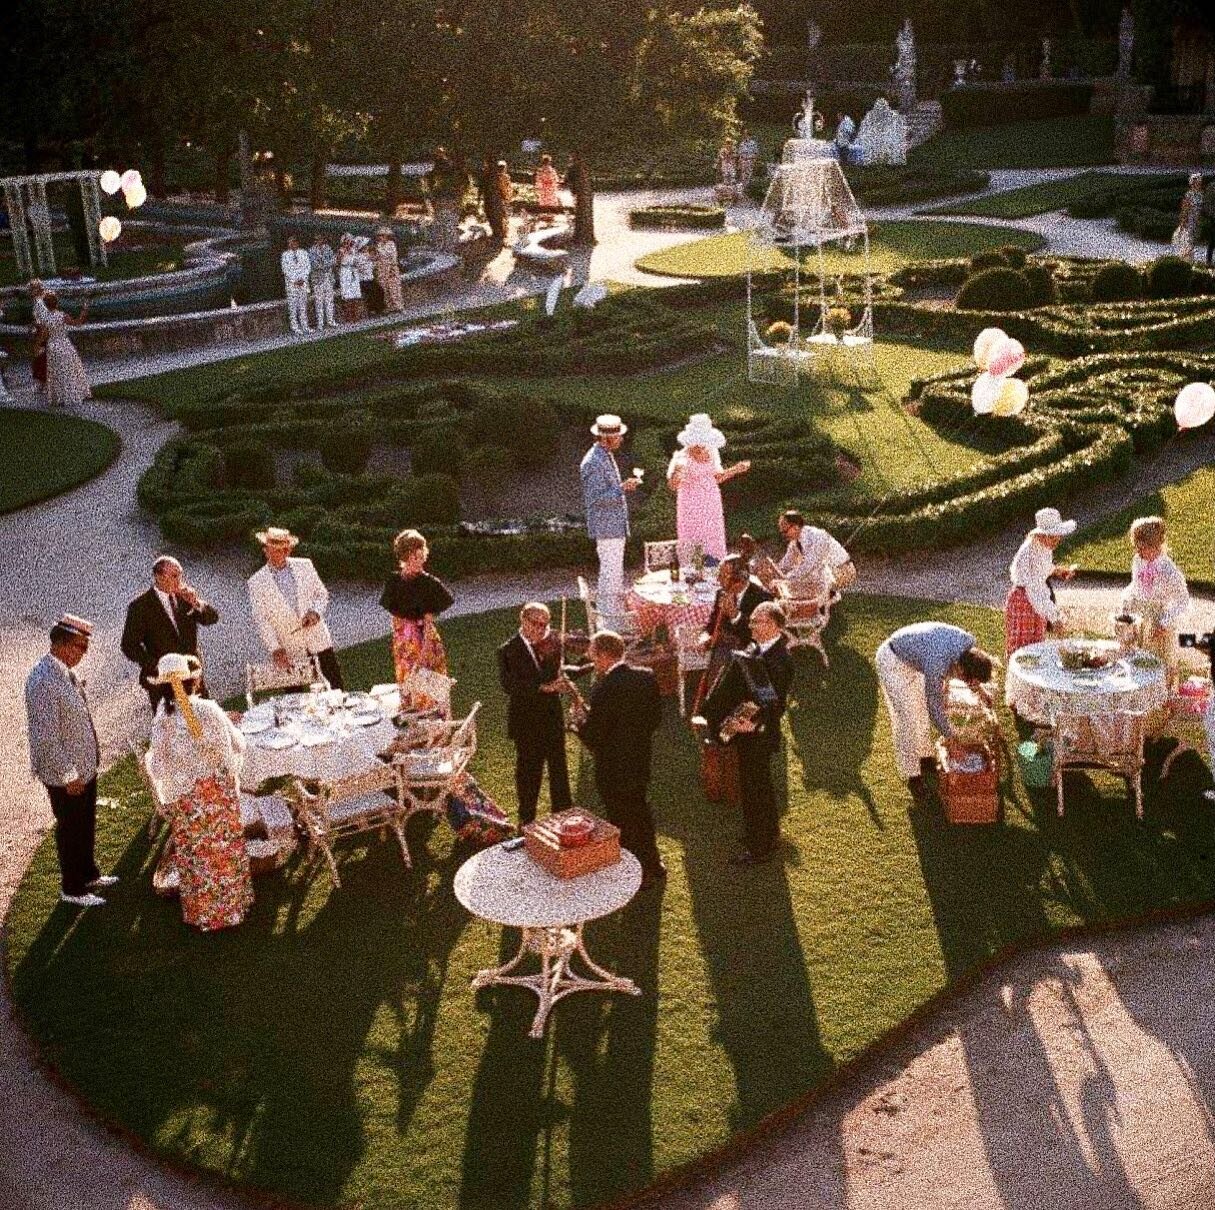 &ldquo;1970: an elegant garden party in Miami, Florida.&rdquo; by Slim Aarons ✨ 
(Getty images)
.
.
.
.
.
.
#vintagestyle #vintage #vintageshop #shopvintage #vintageparty #slimaarons #vintageaesthetic #aesthetic #vintageinspiration